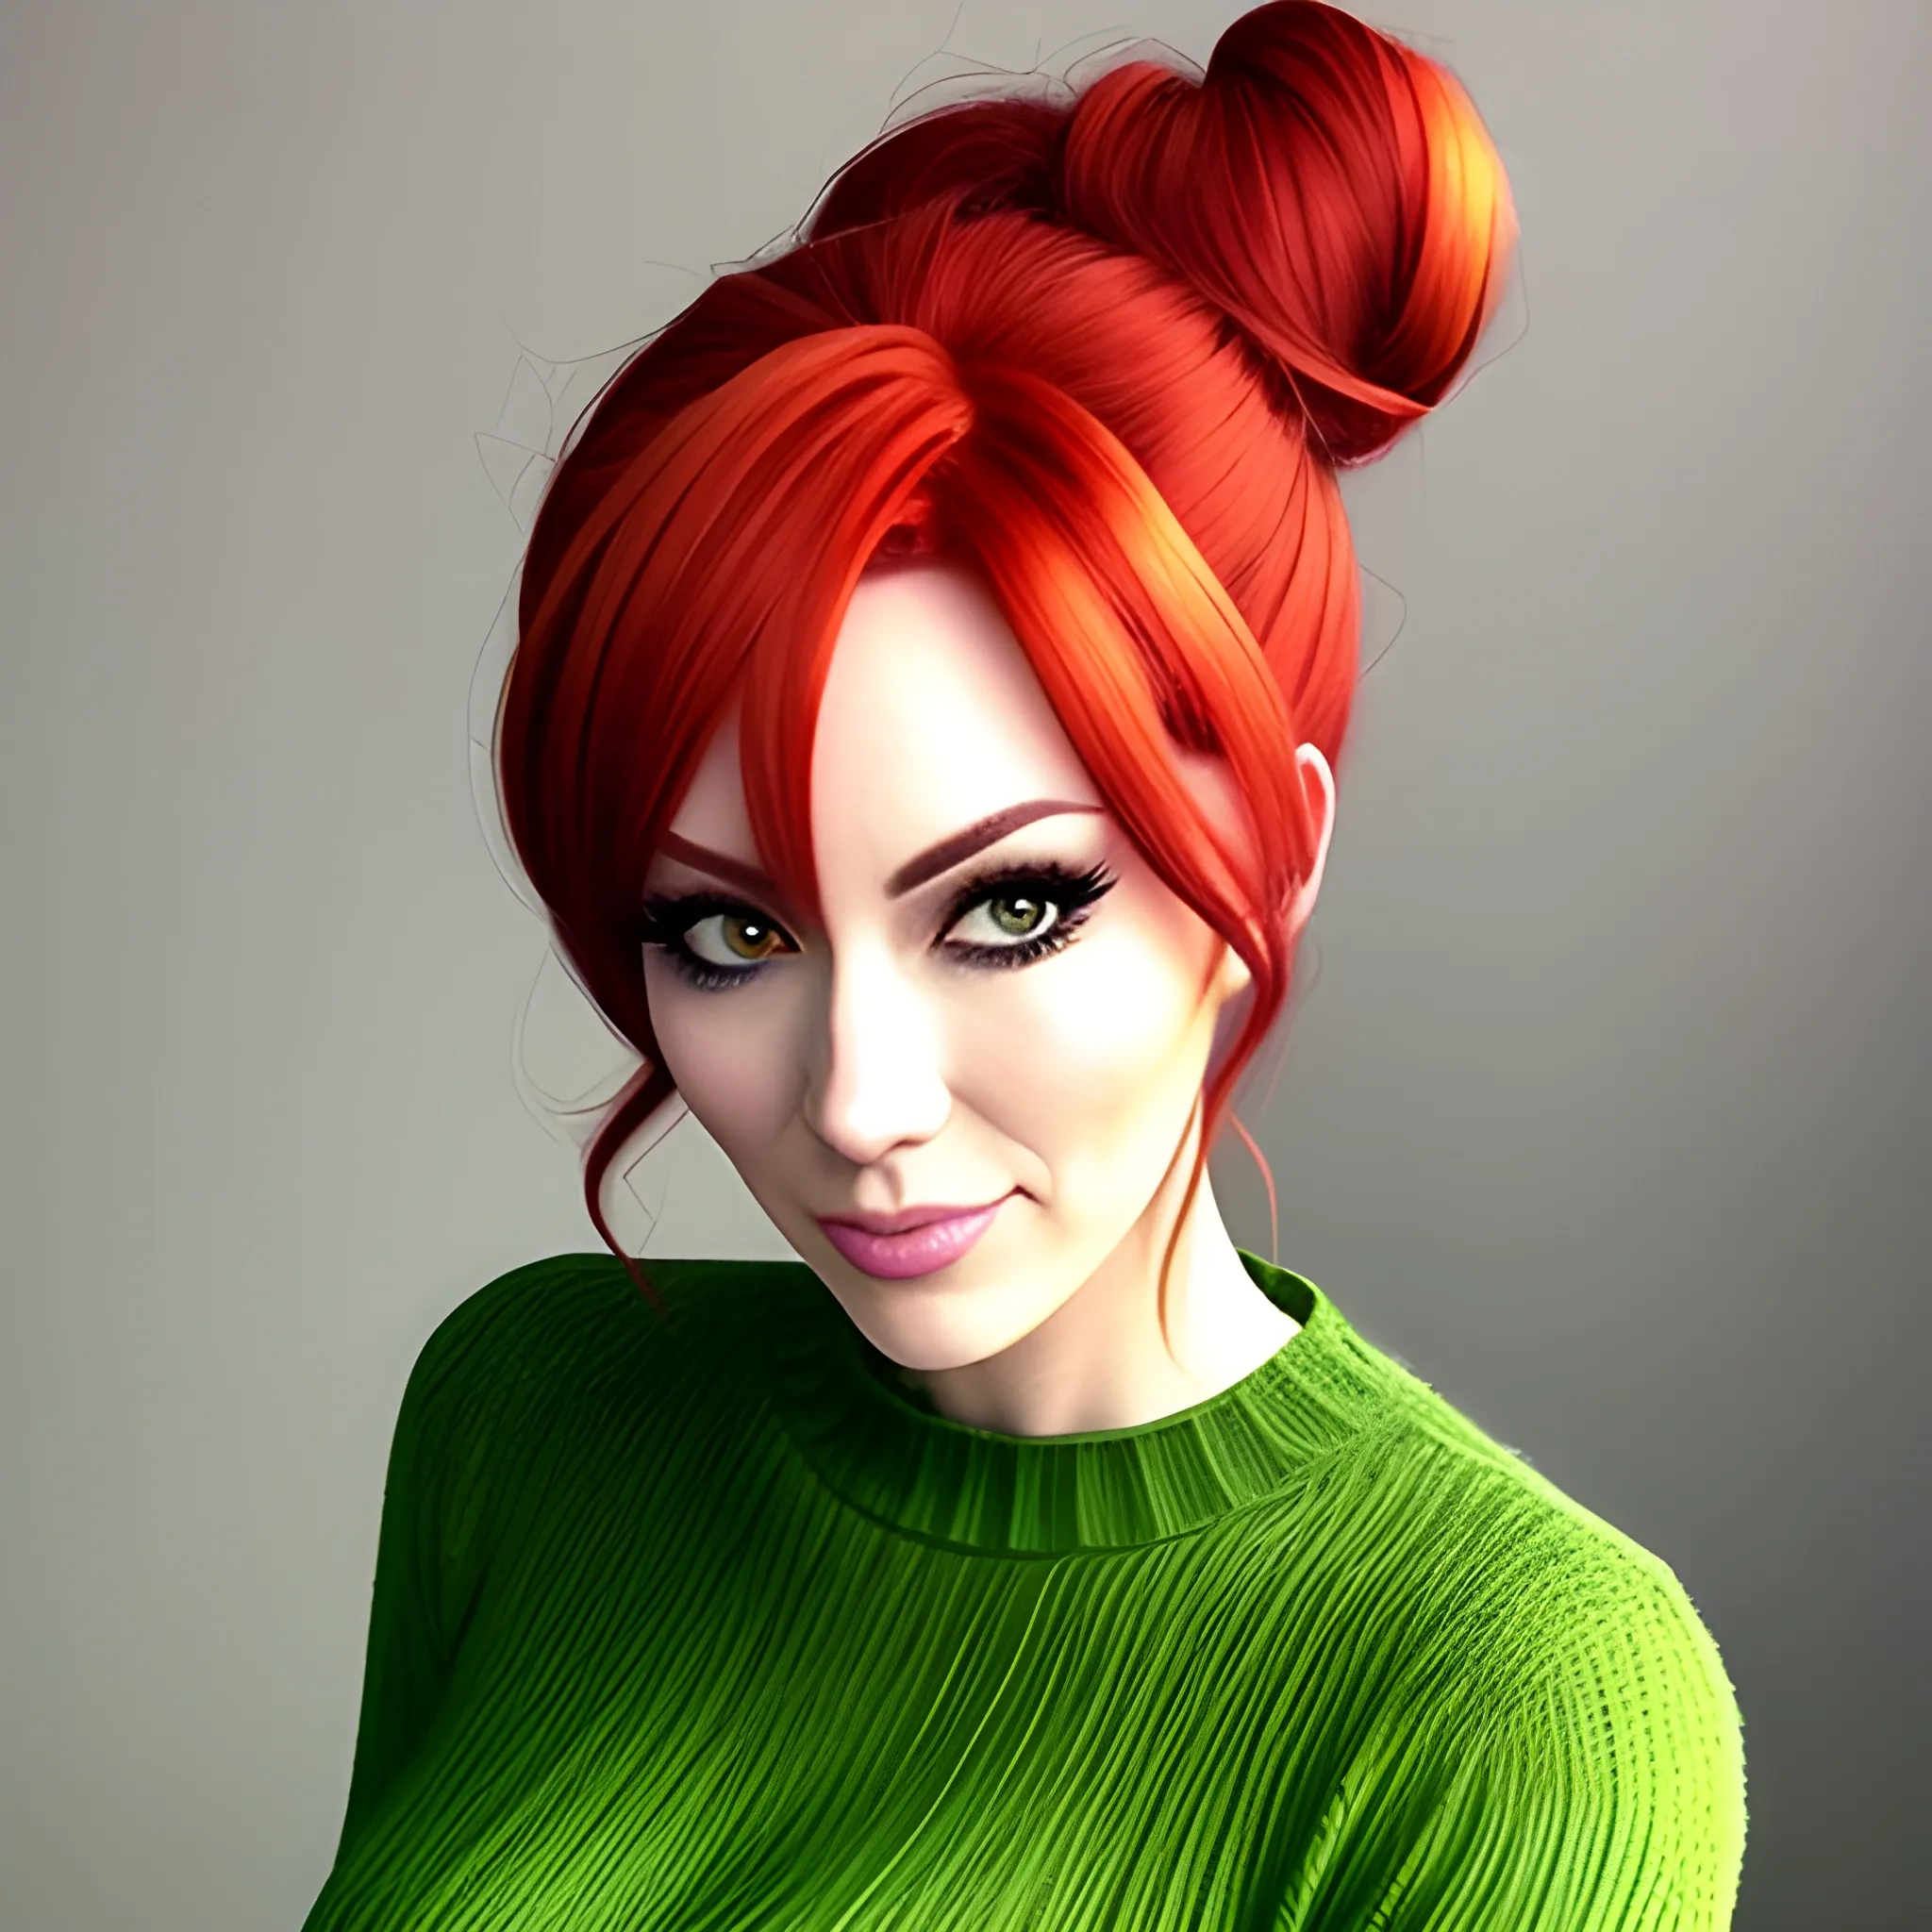 anime girl, red hair with messy bun, wearing green sweater